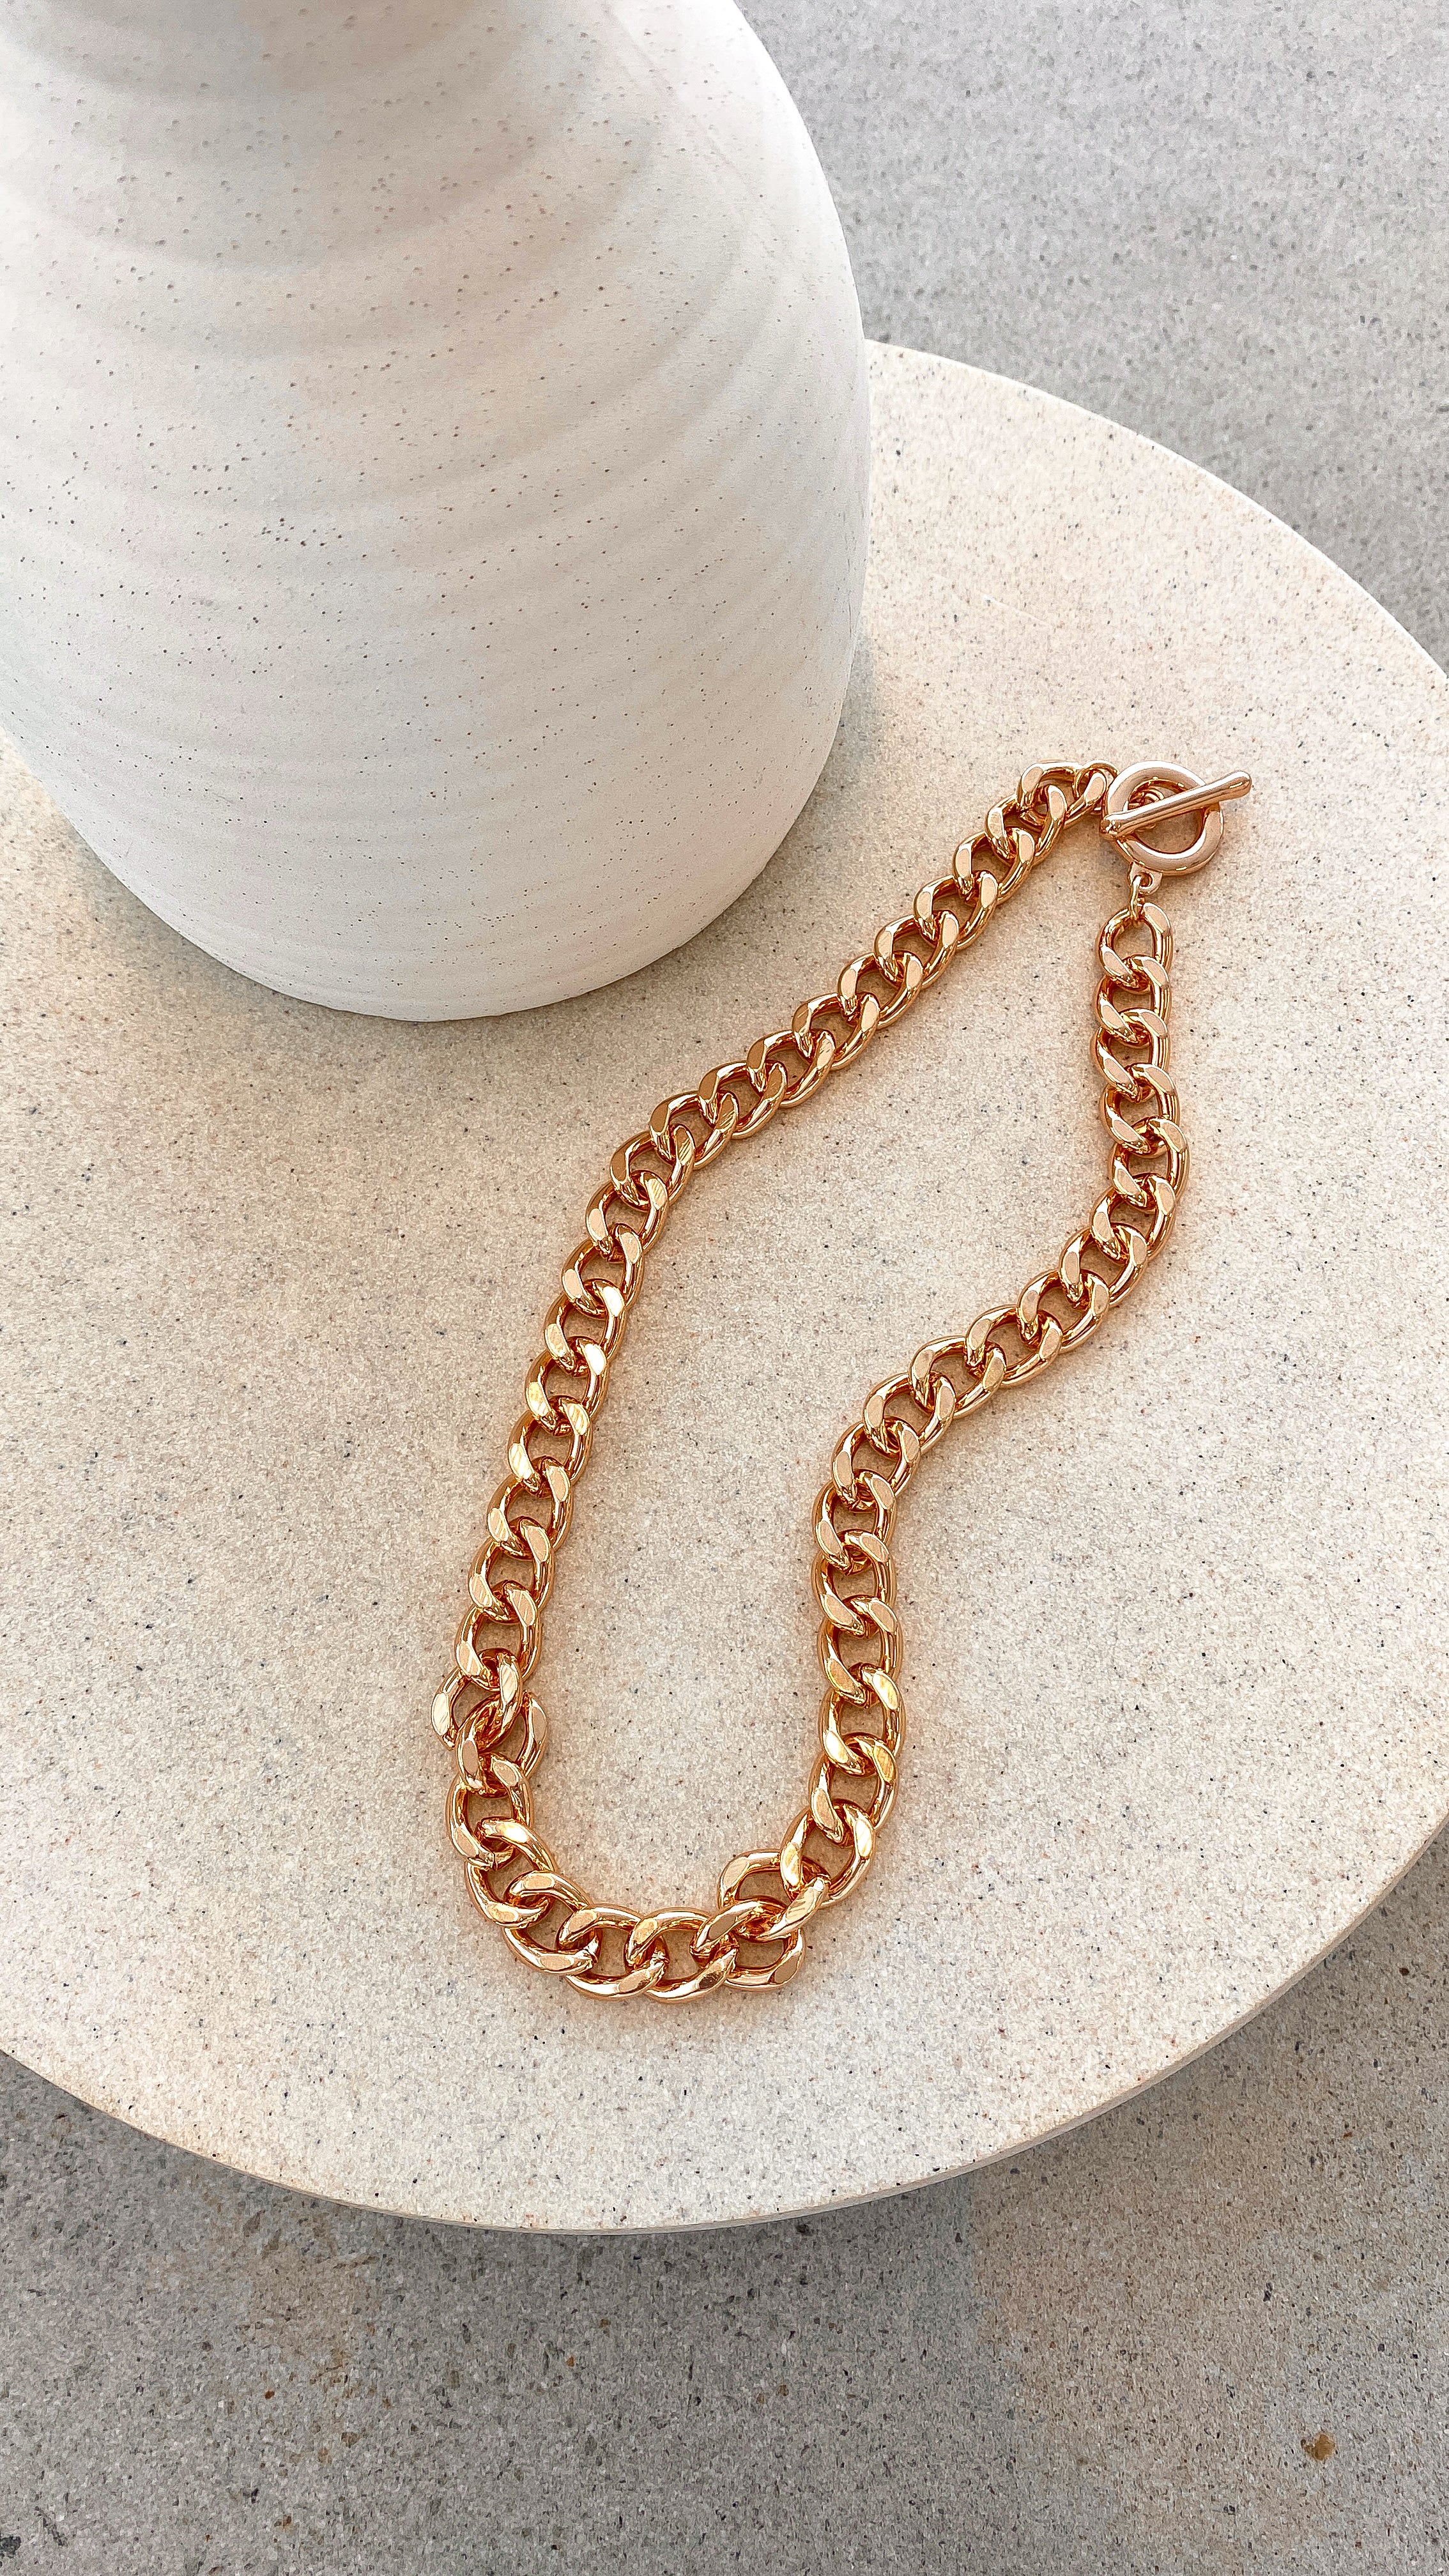 Chunky Fob Chain Necklace - Gold - Billy J